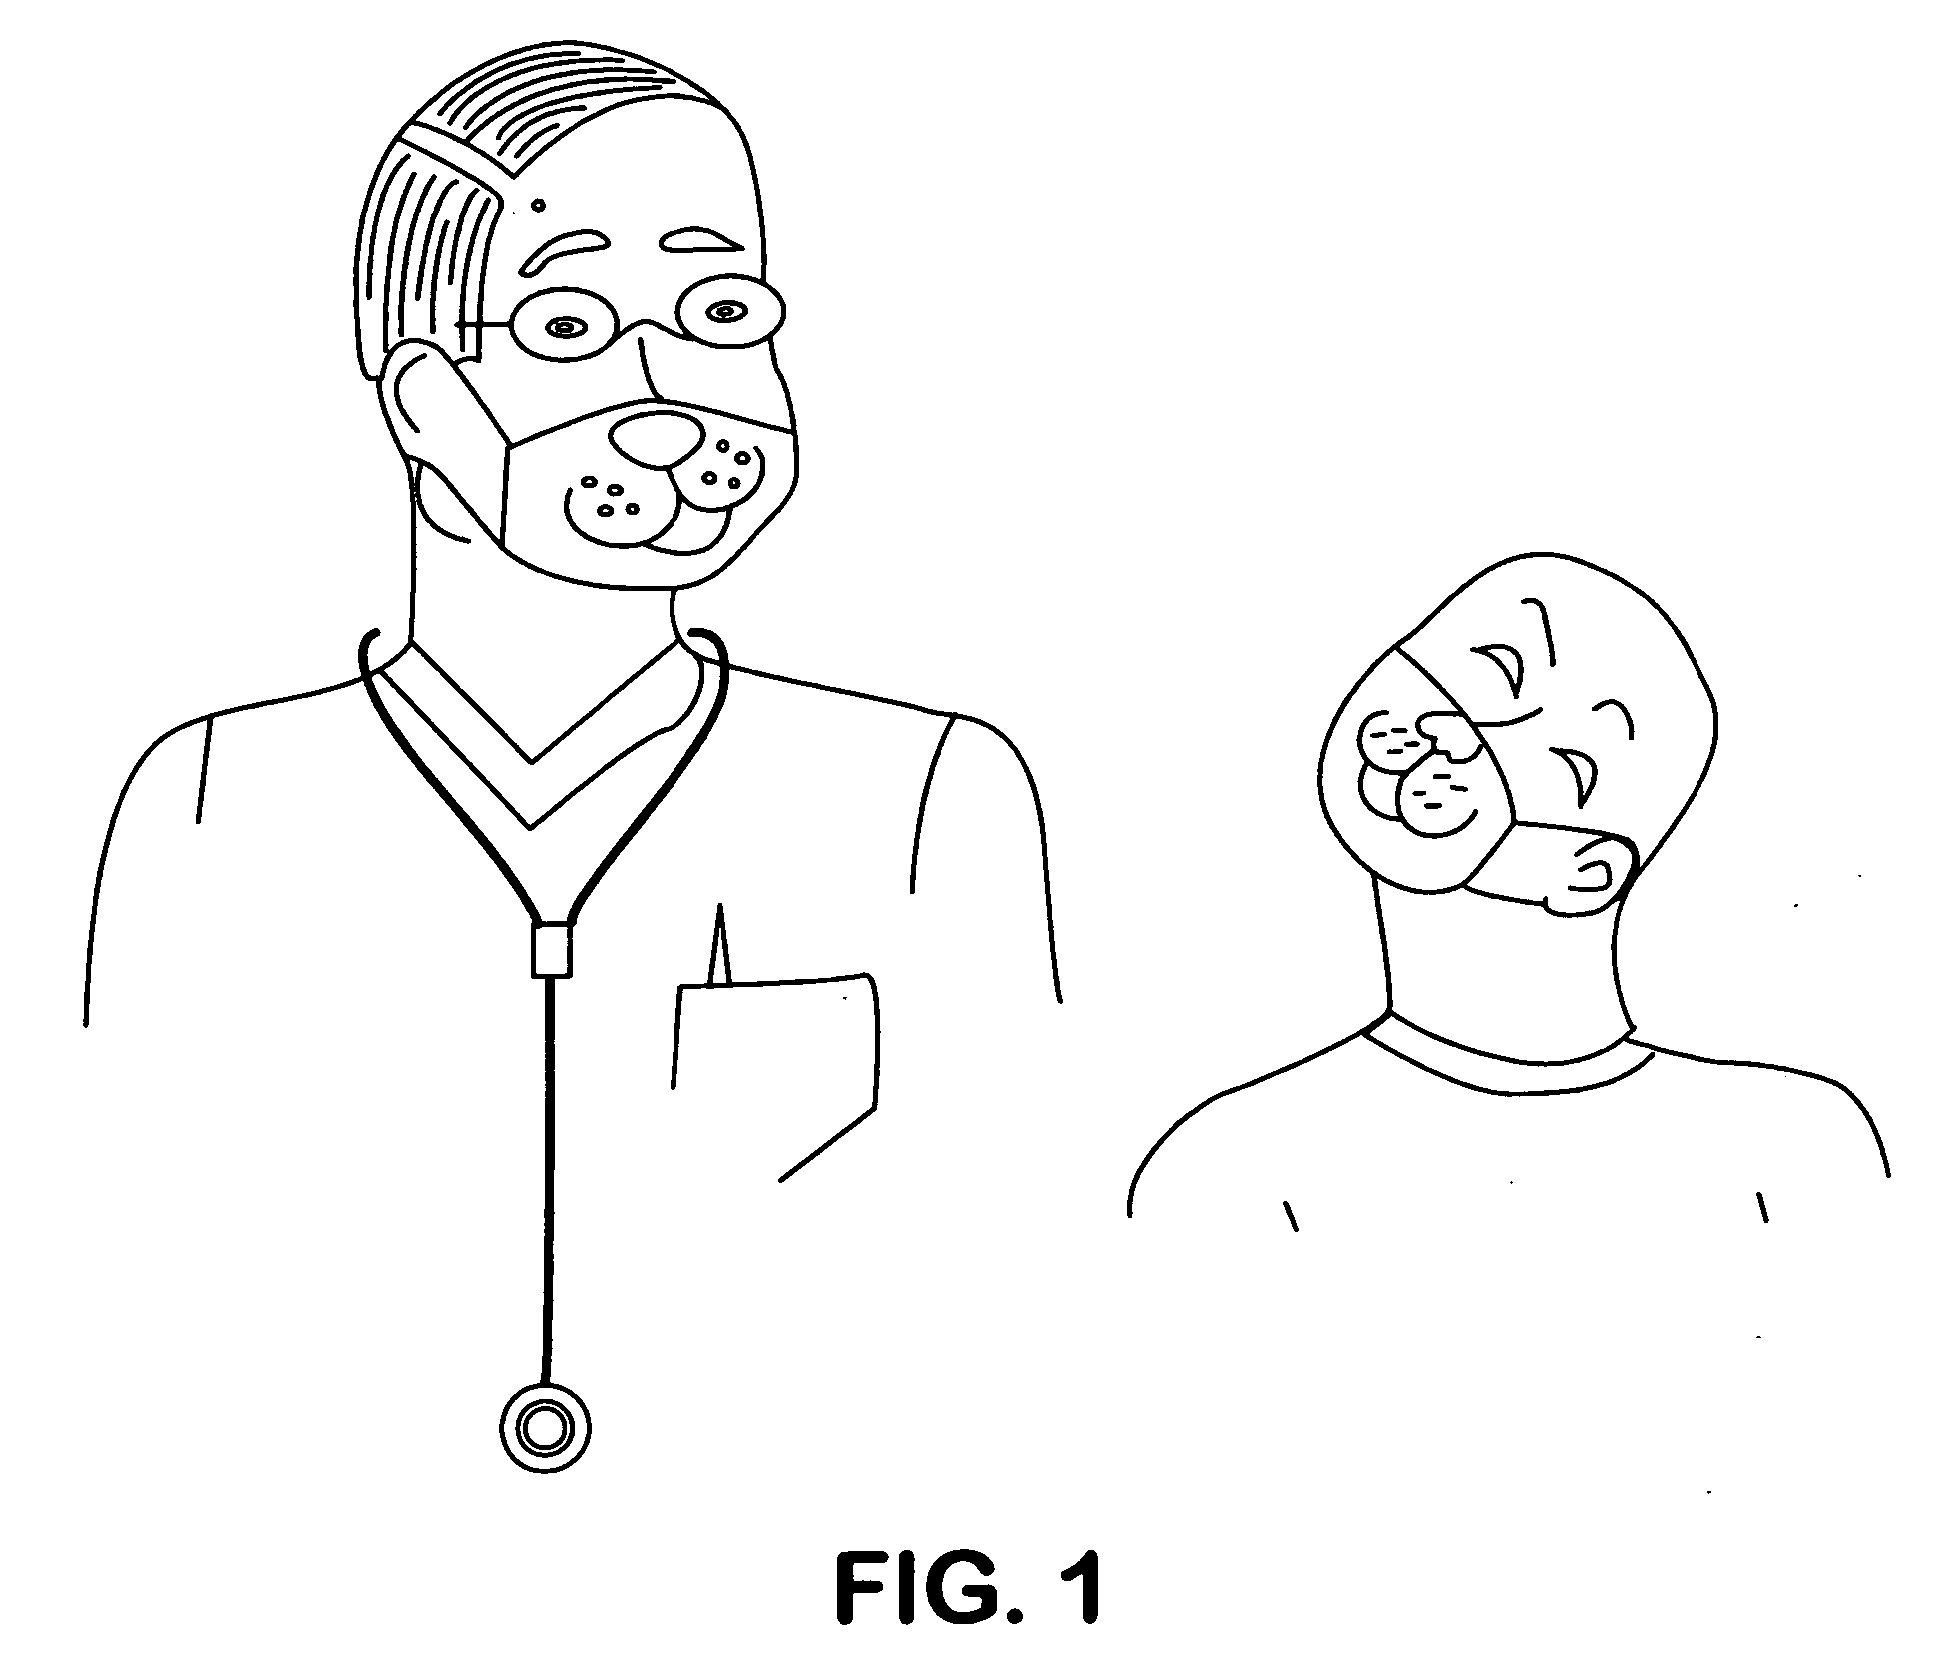 Coordinated medical face mask system